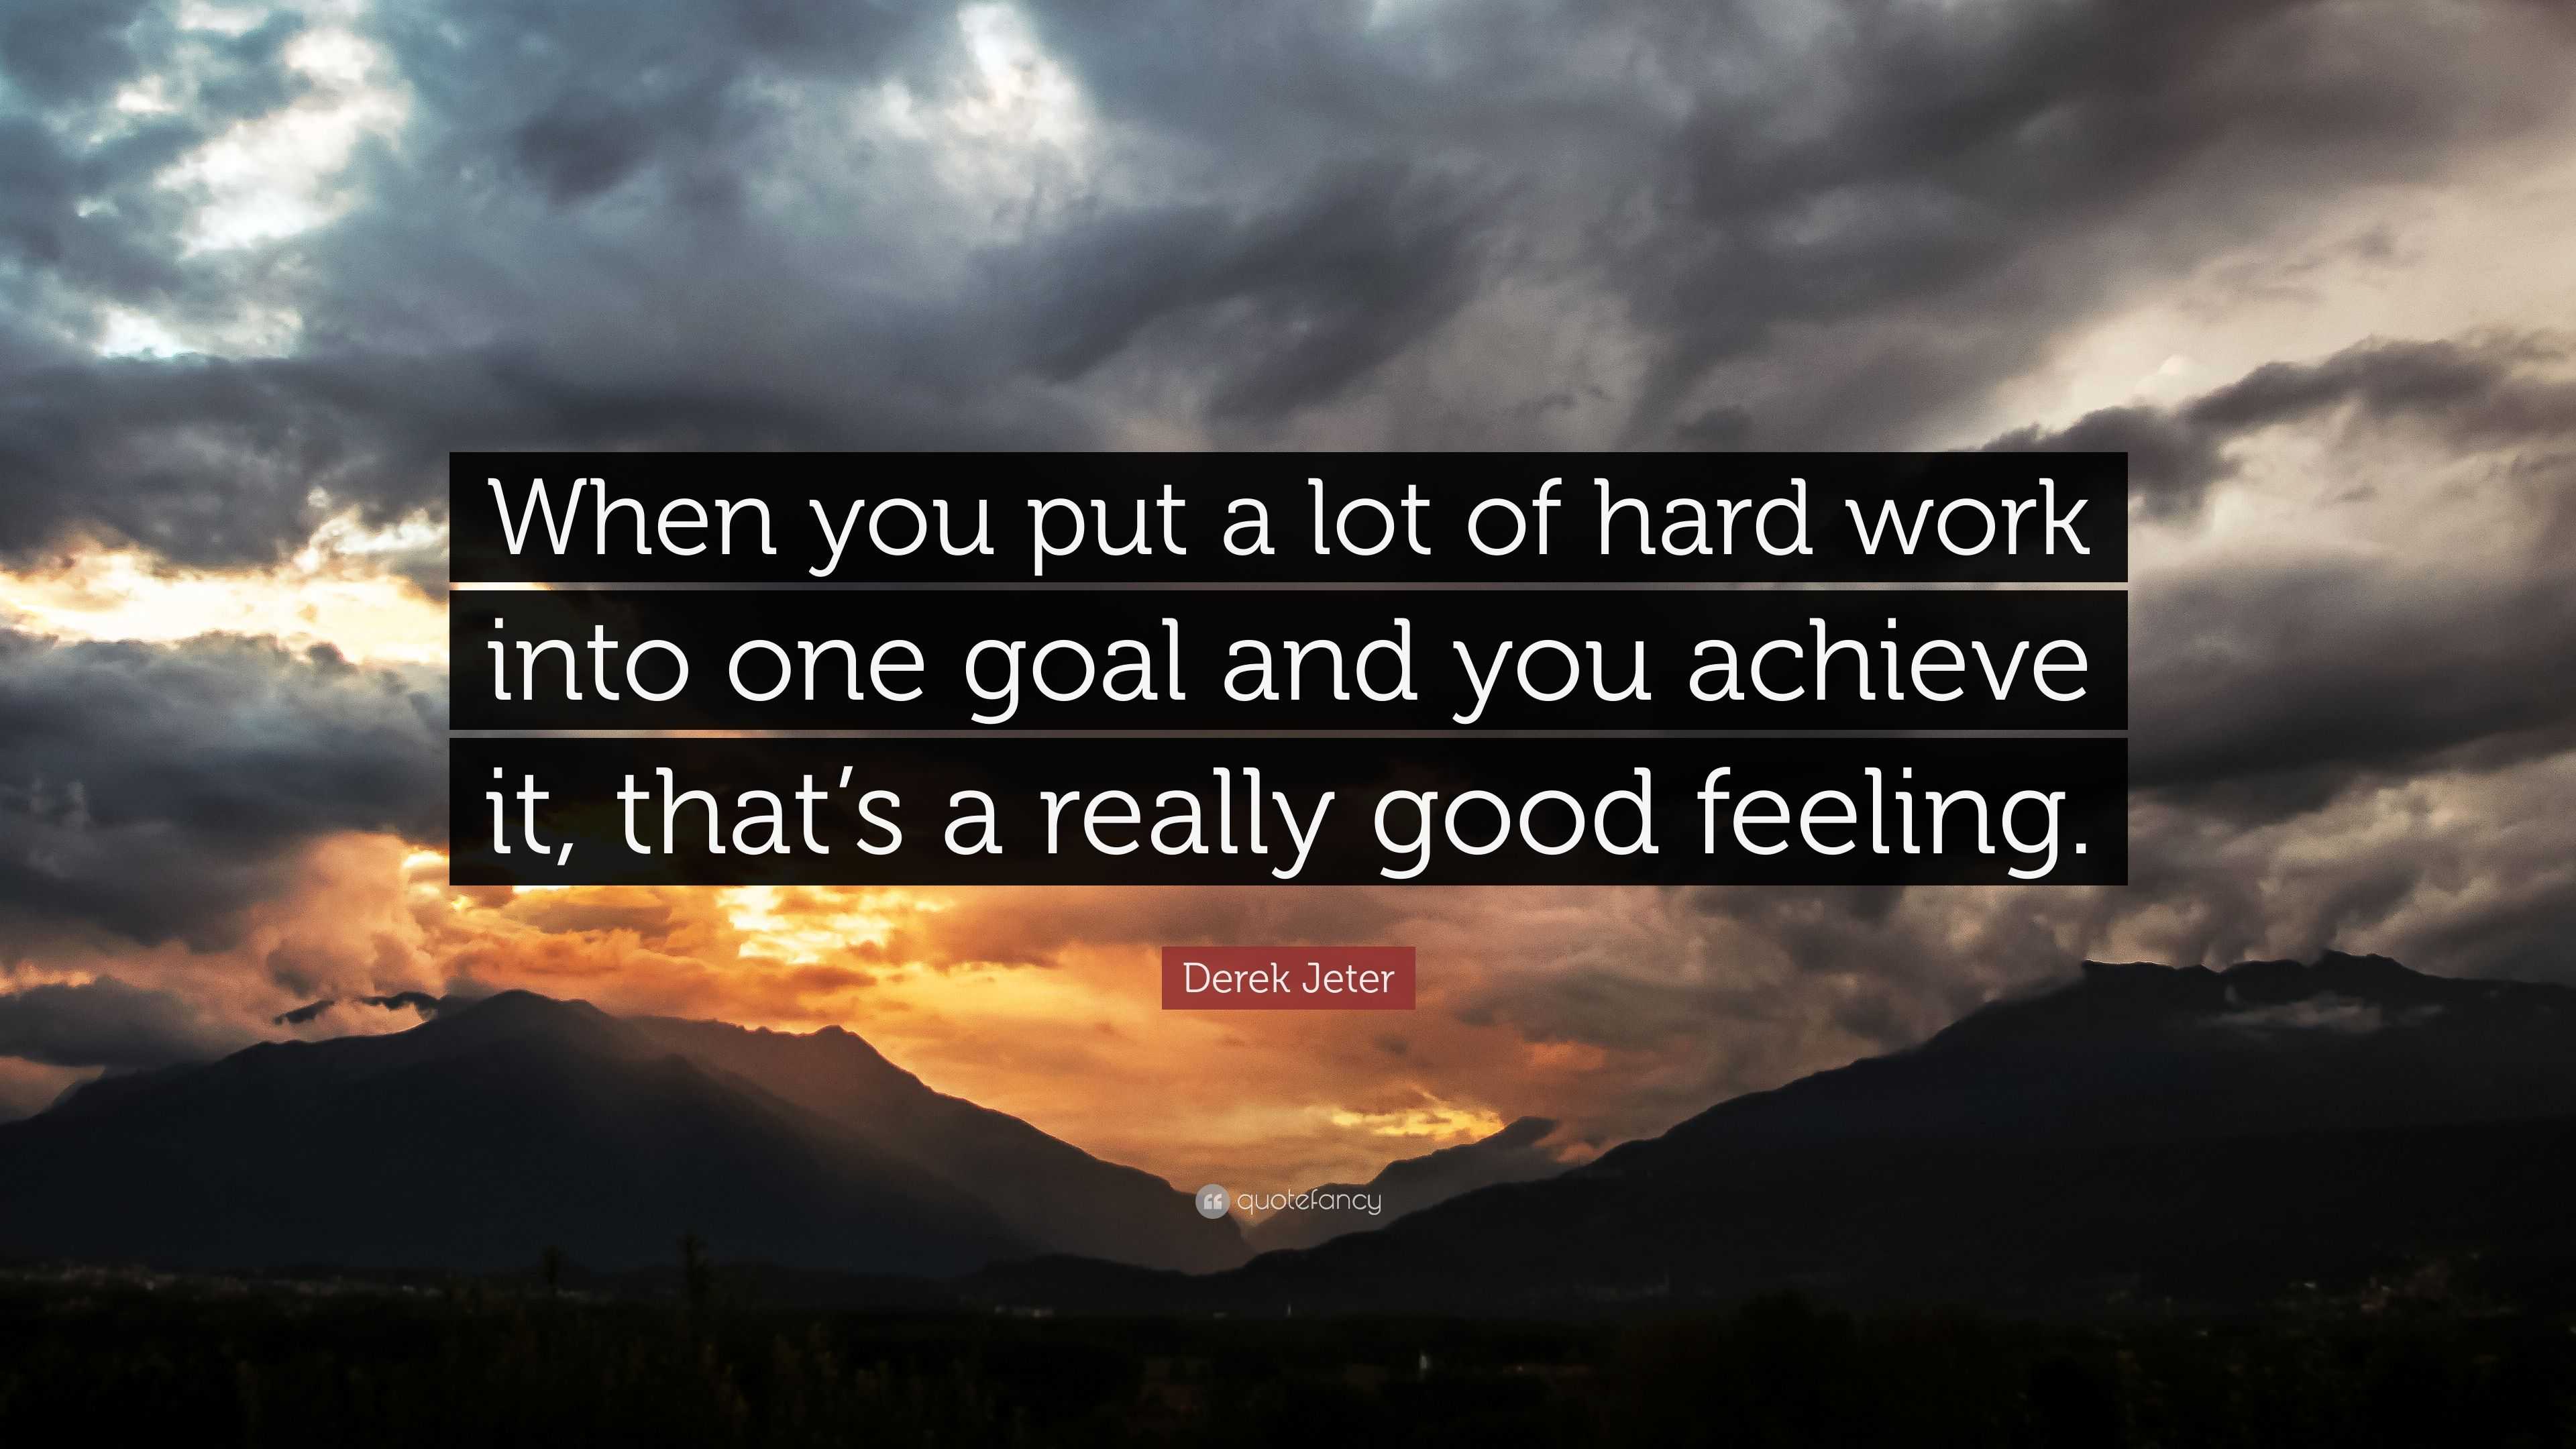 Derek Jeter Quote: “When you put a lot of hard work into one goal